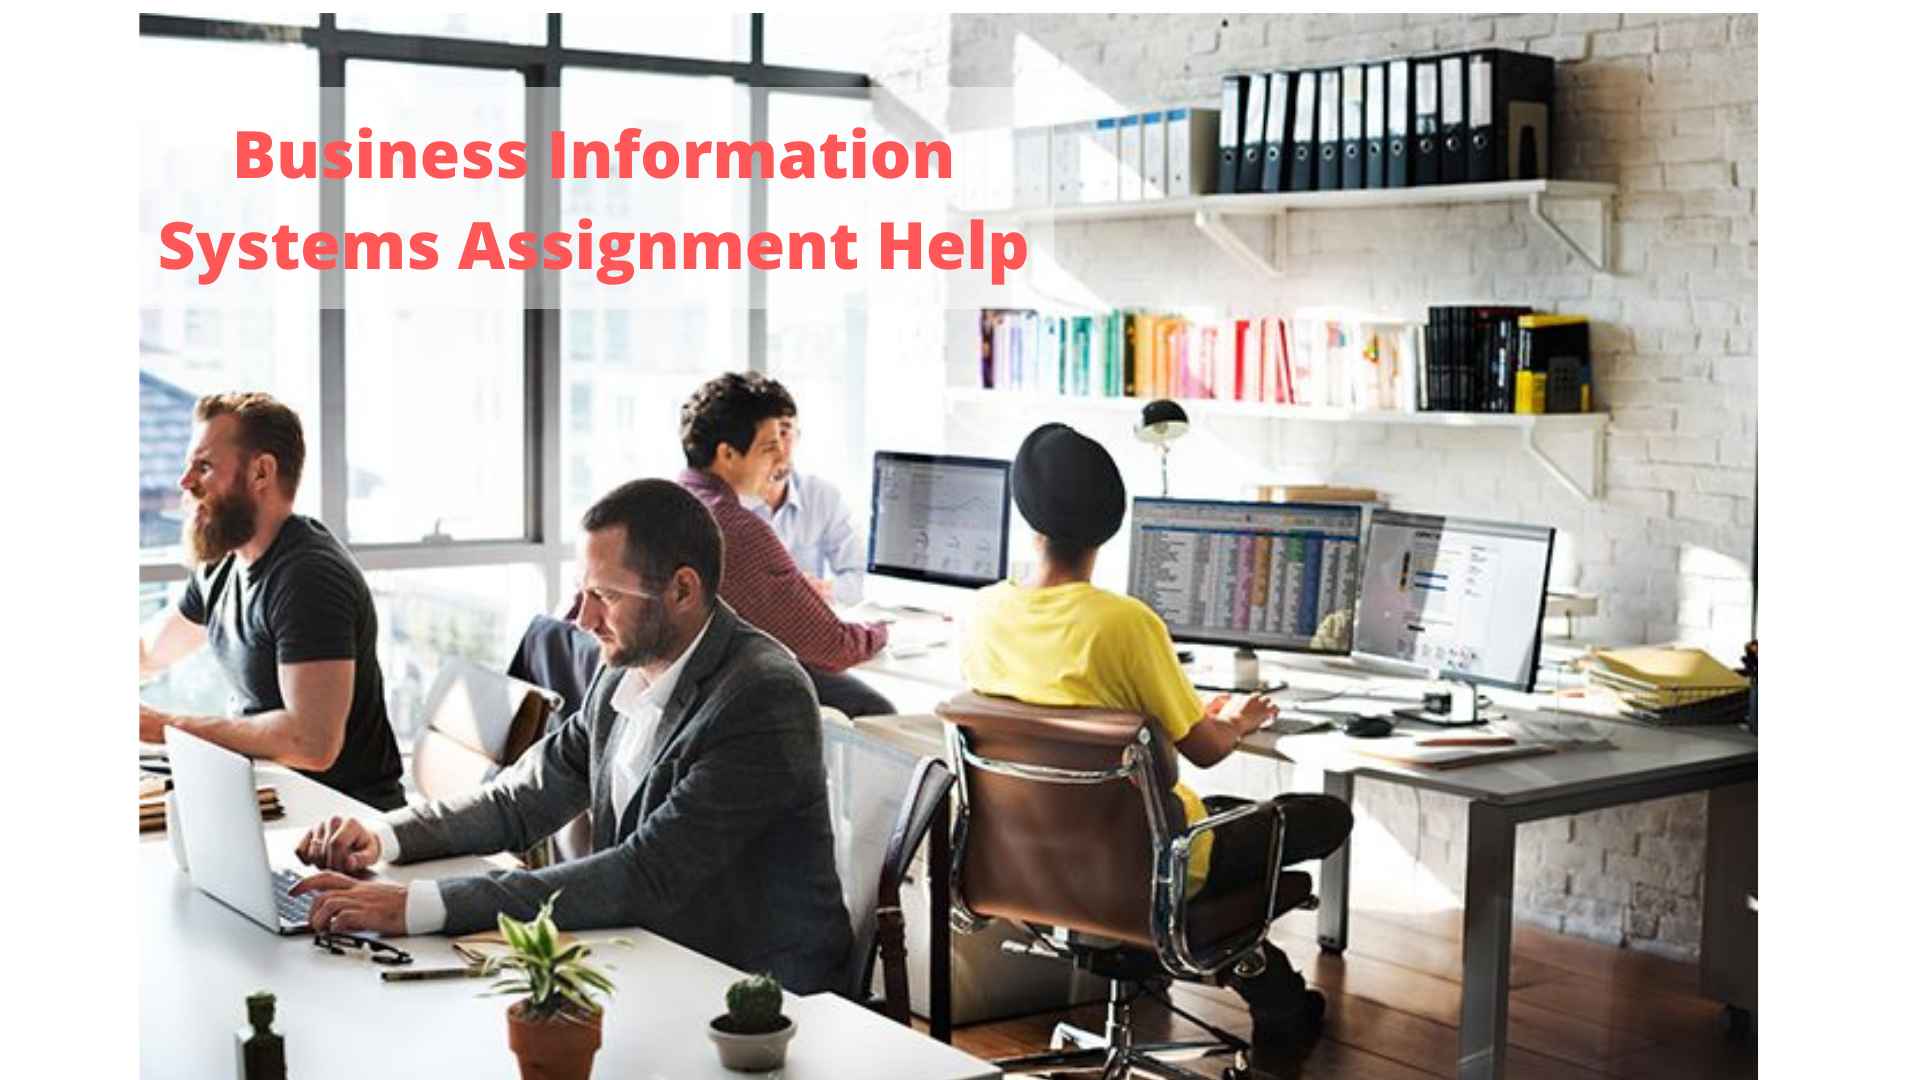 Business information system assignment help